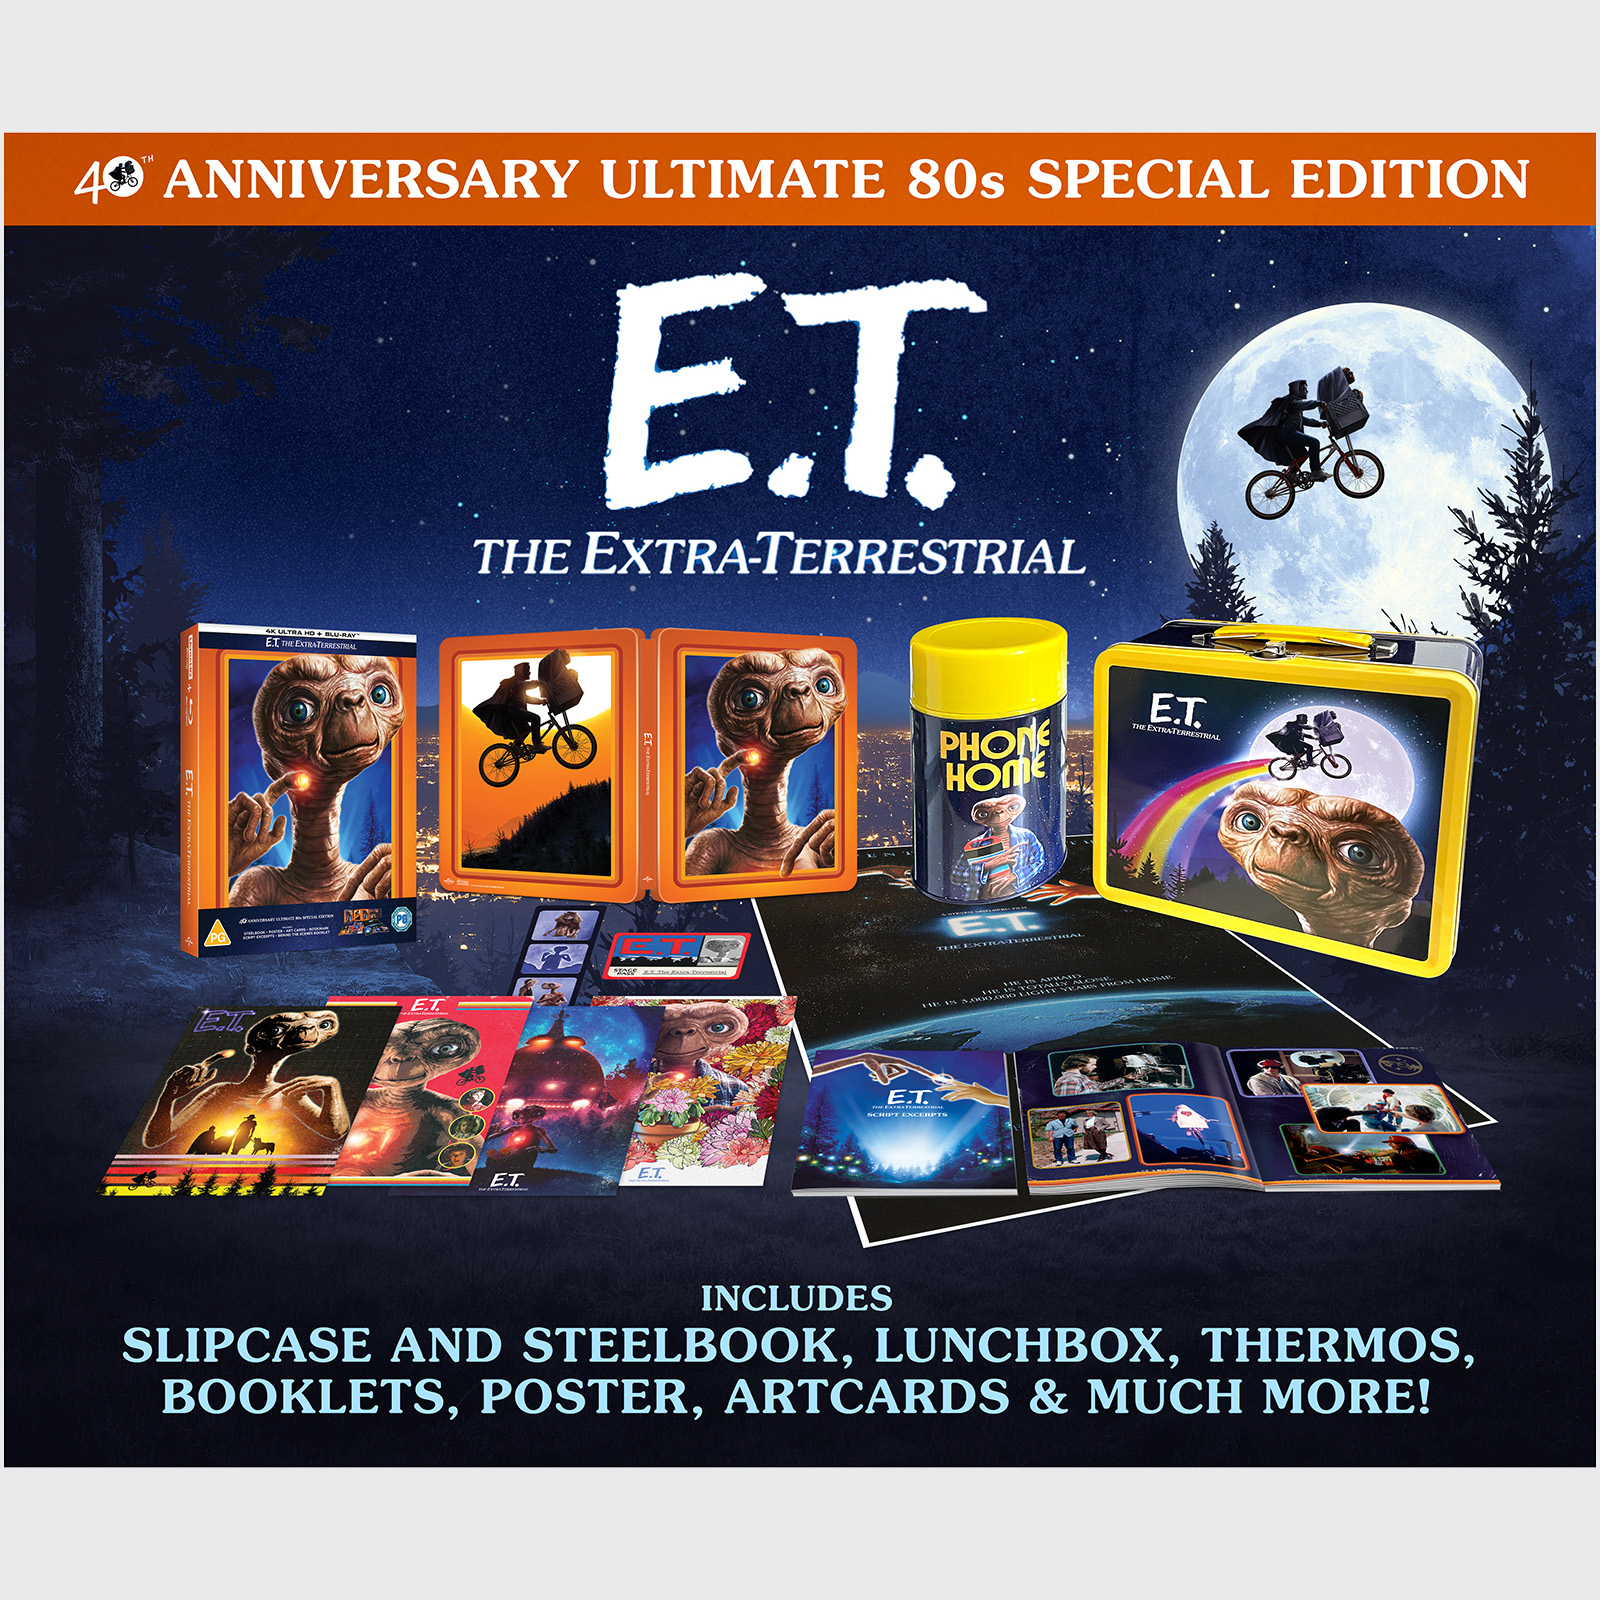 Image showing all the content of the Steelbook set. Text on the image reads 40th anniversary ultimate 80s special edition. E.T. The Extra-Terrestrial. Includes slipcase and steelbook,lunchbox, thermos, booklets, poster, artcards and much more!